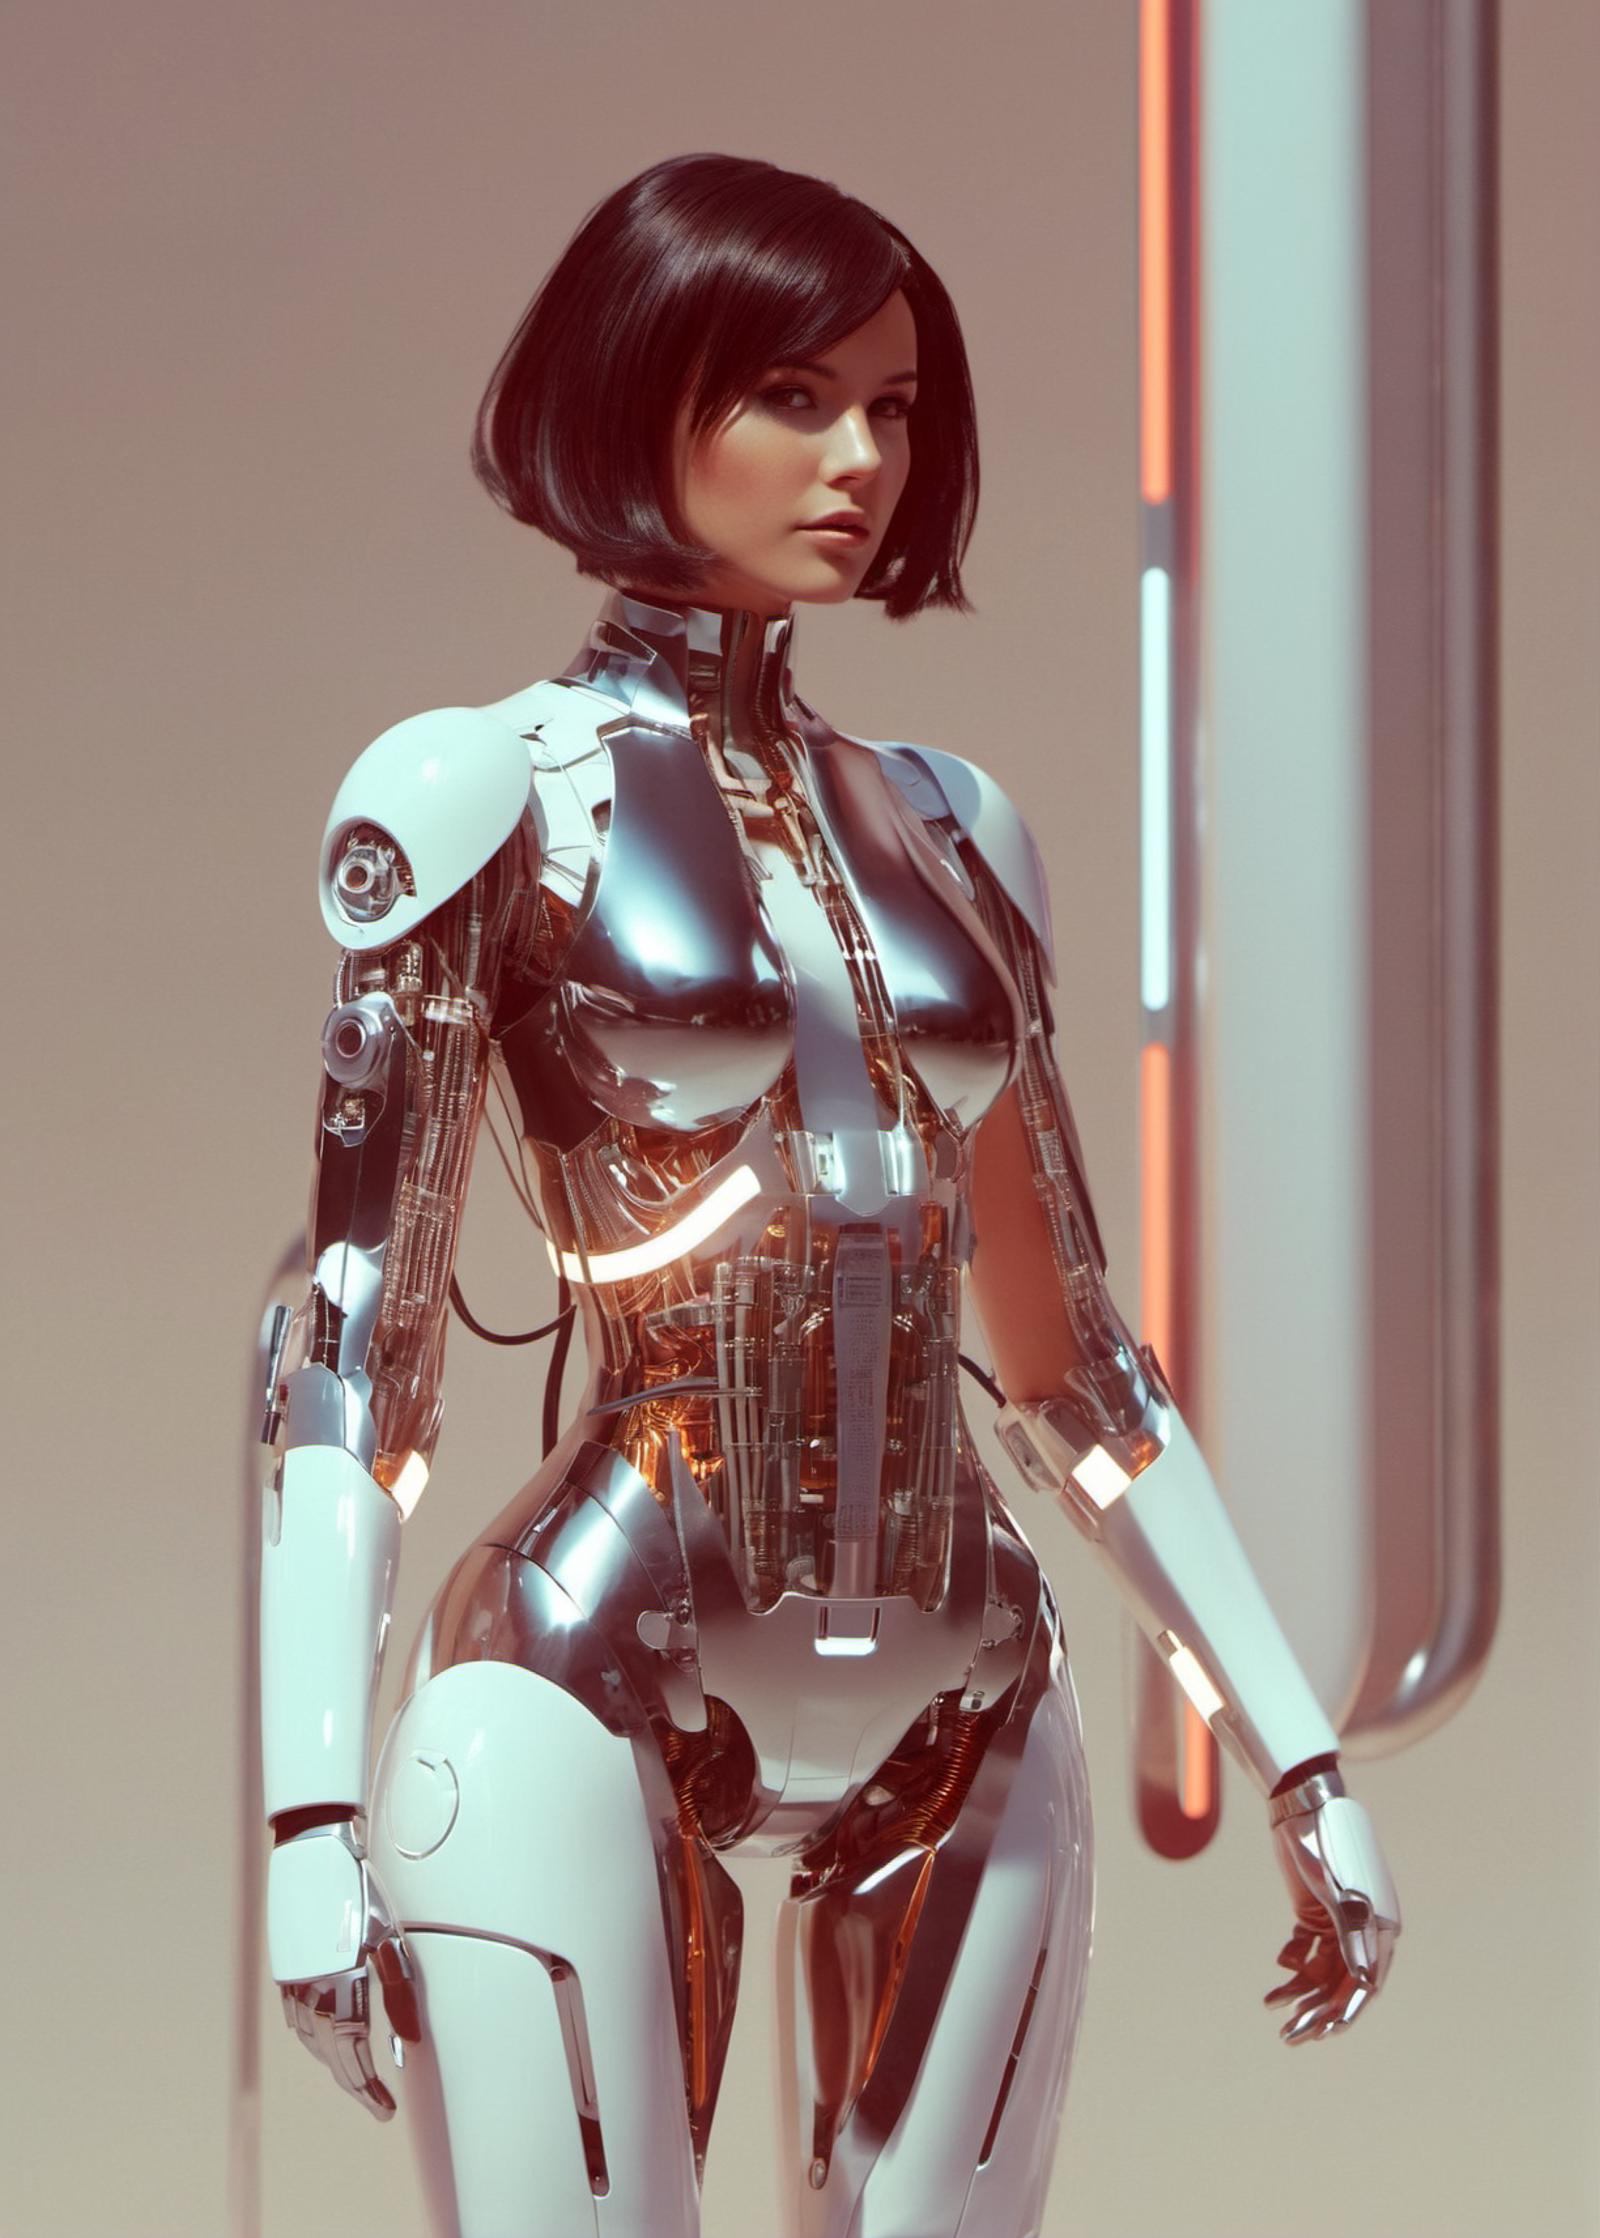 AI model image by deep_synth